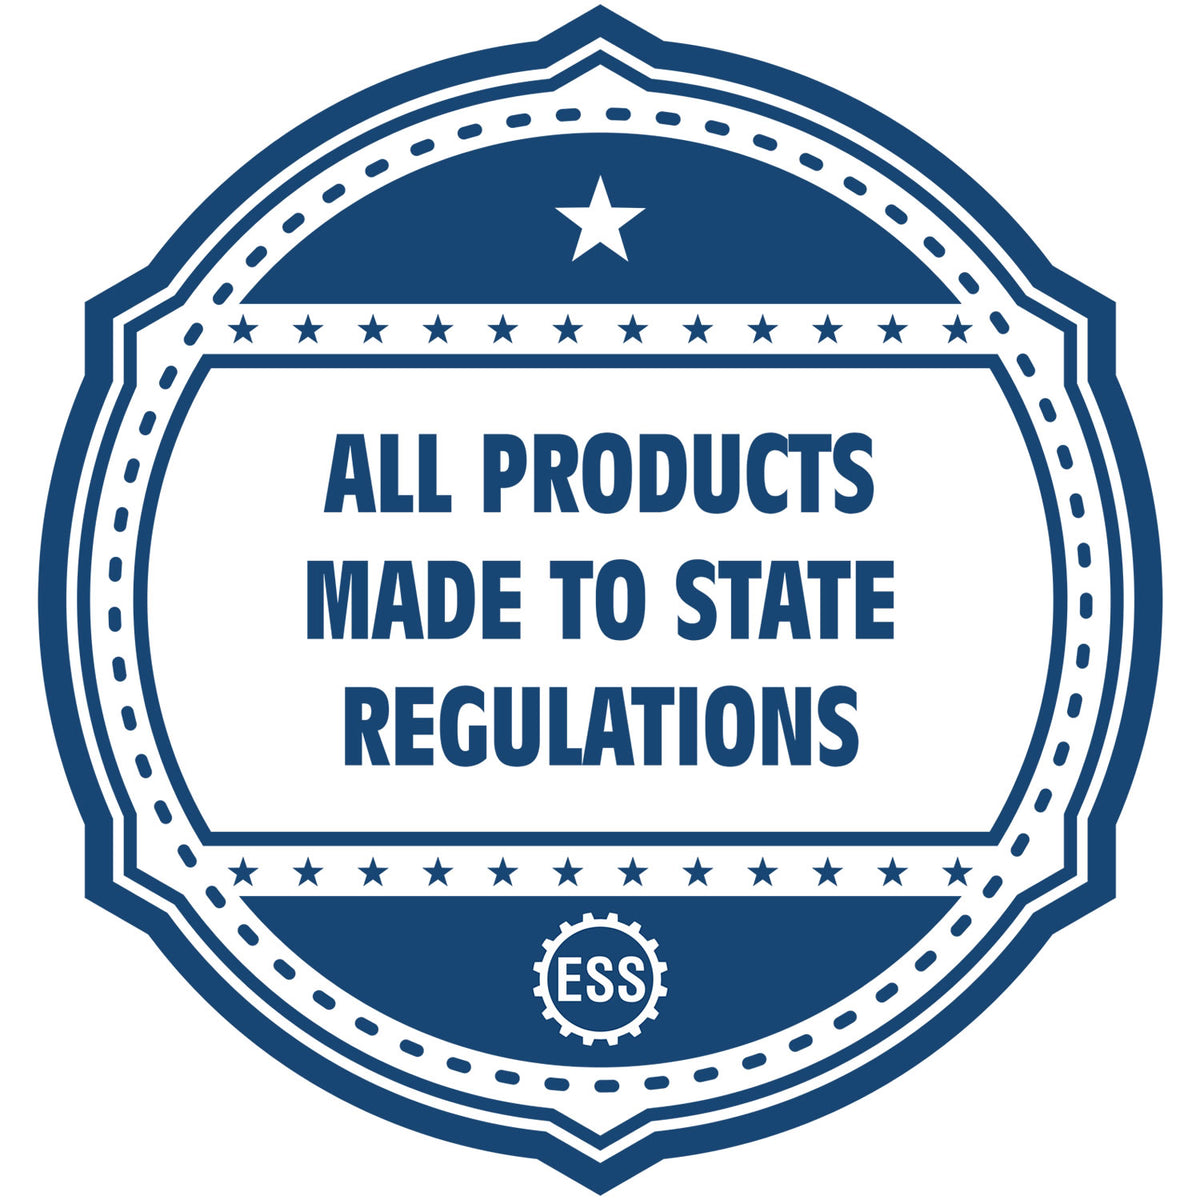 An icon or badge element for the Digital Nebraska Landscape Architect Stamp showing that this product is made in compliance with state regulations.